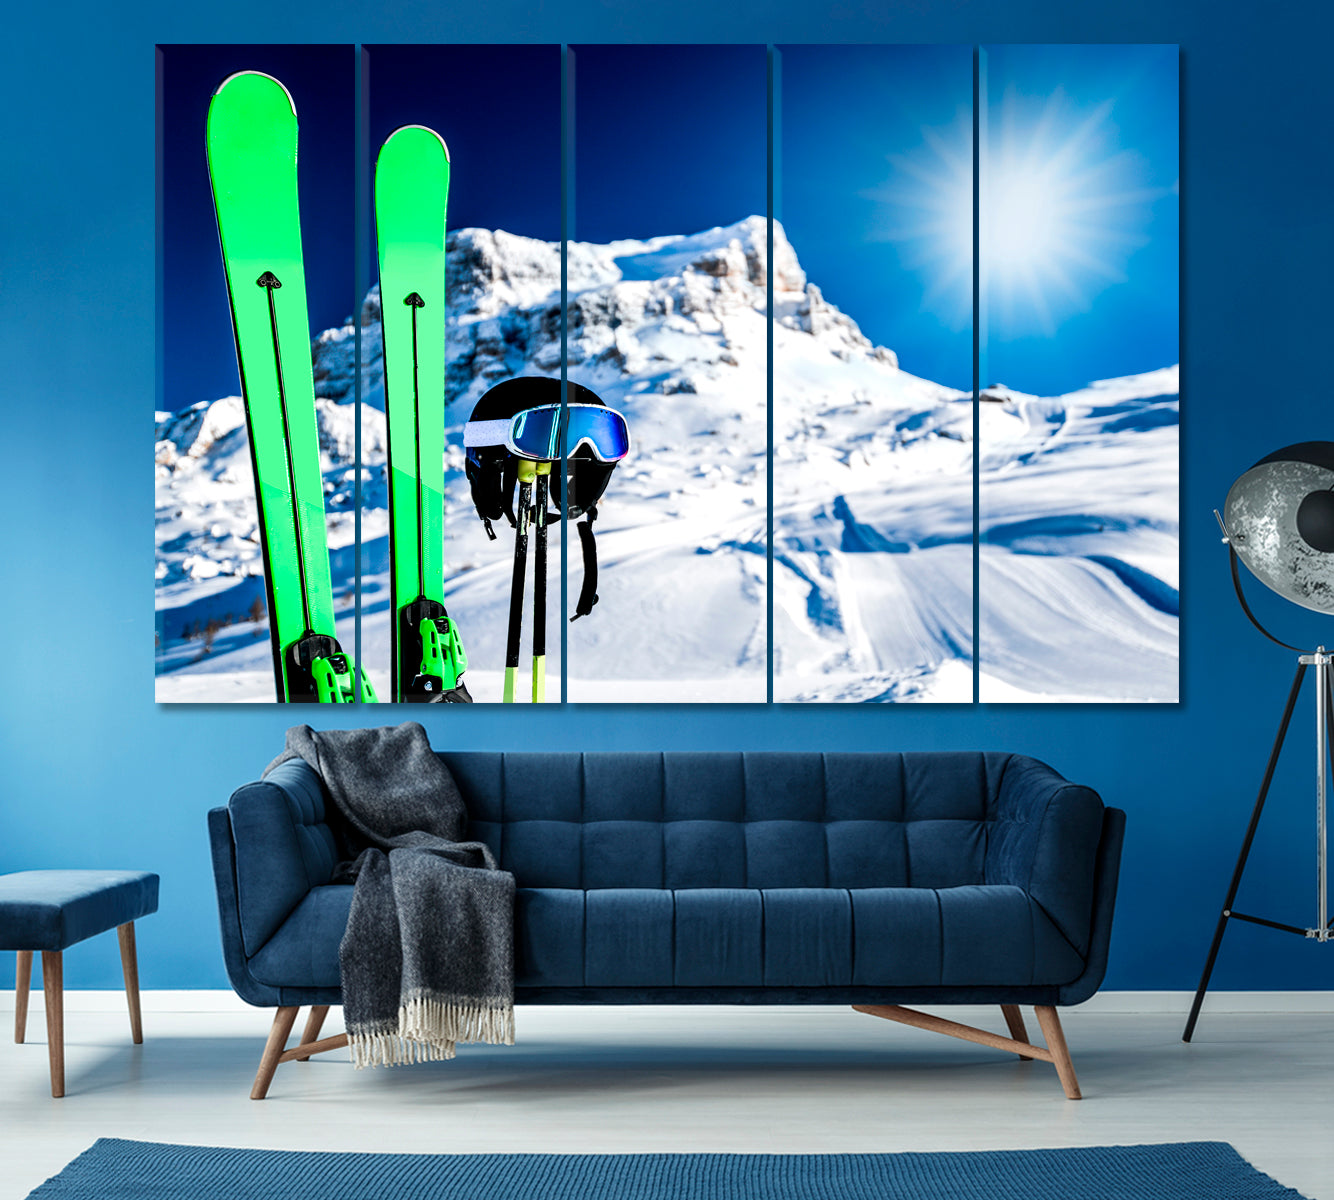 Skis in Snow Canvas Print ArtLexy 5 Panels 36"x24" inches 